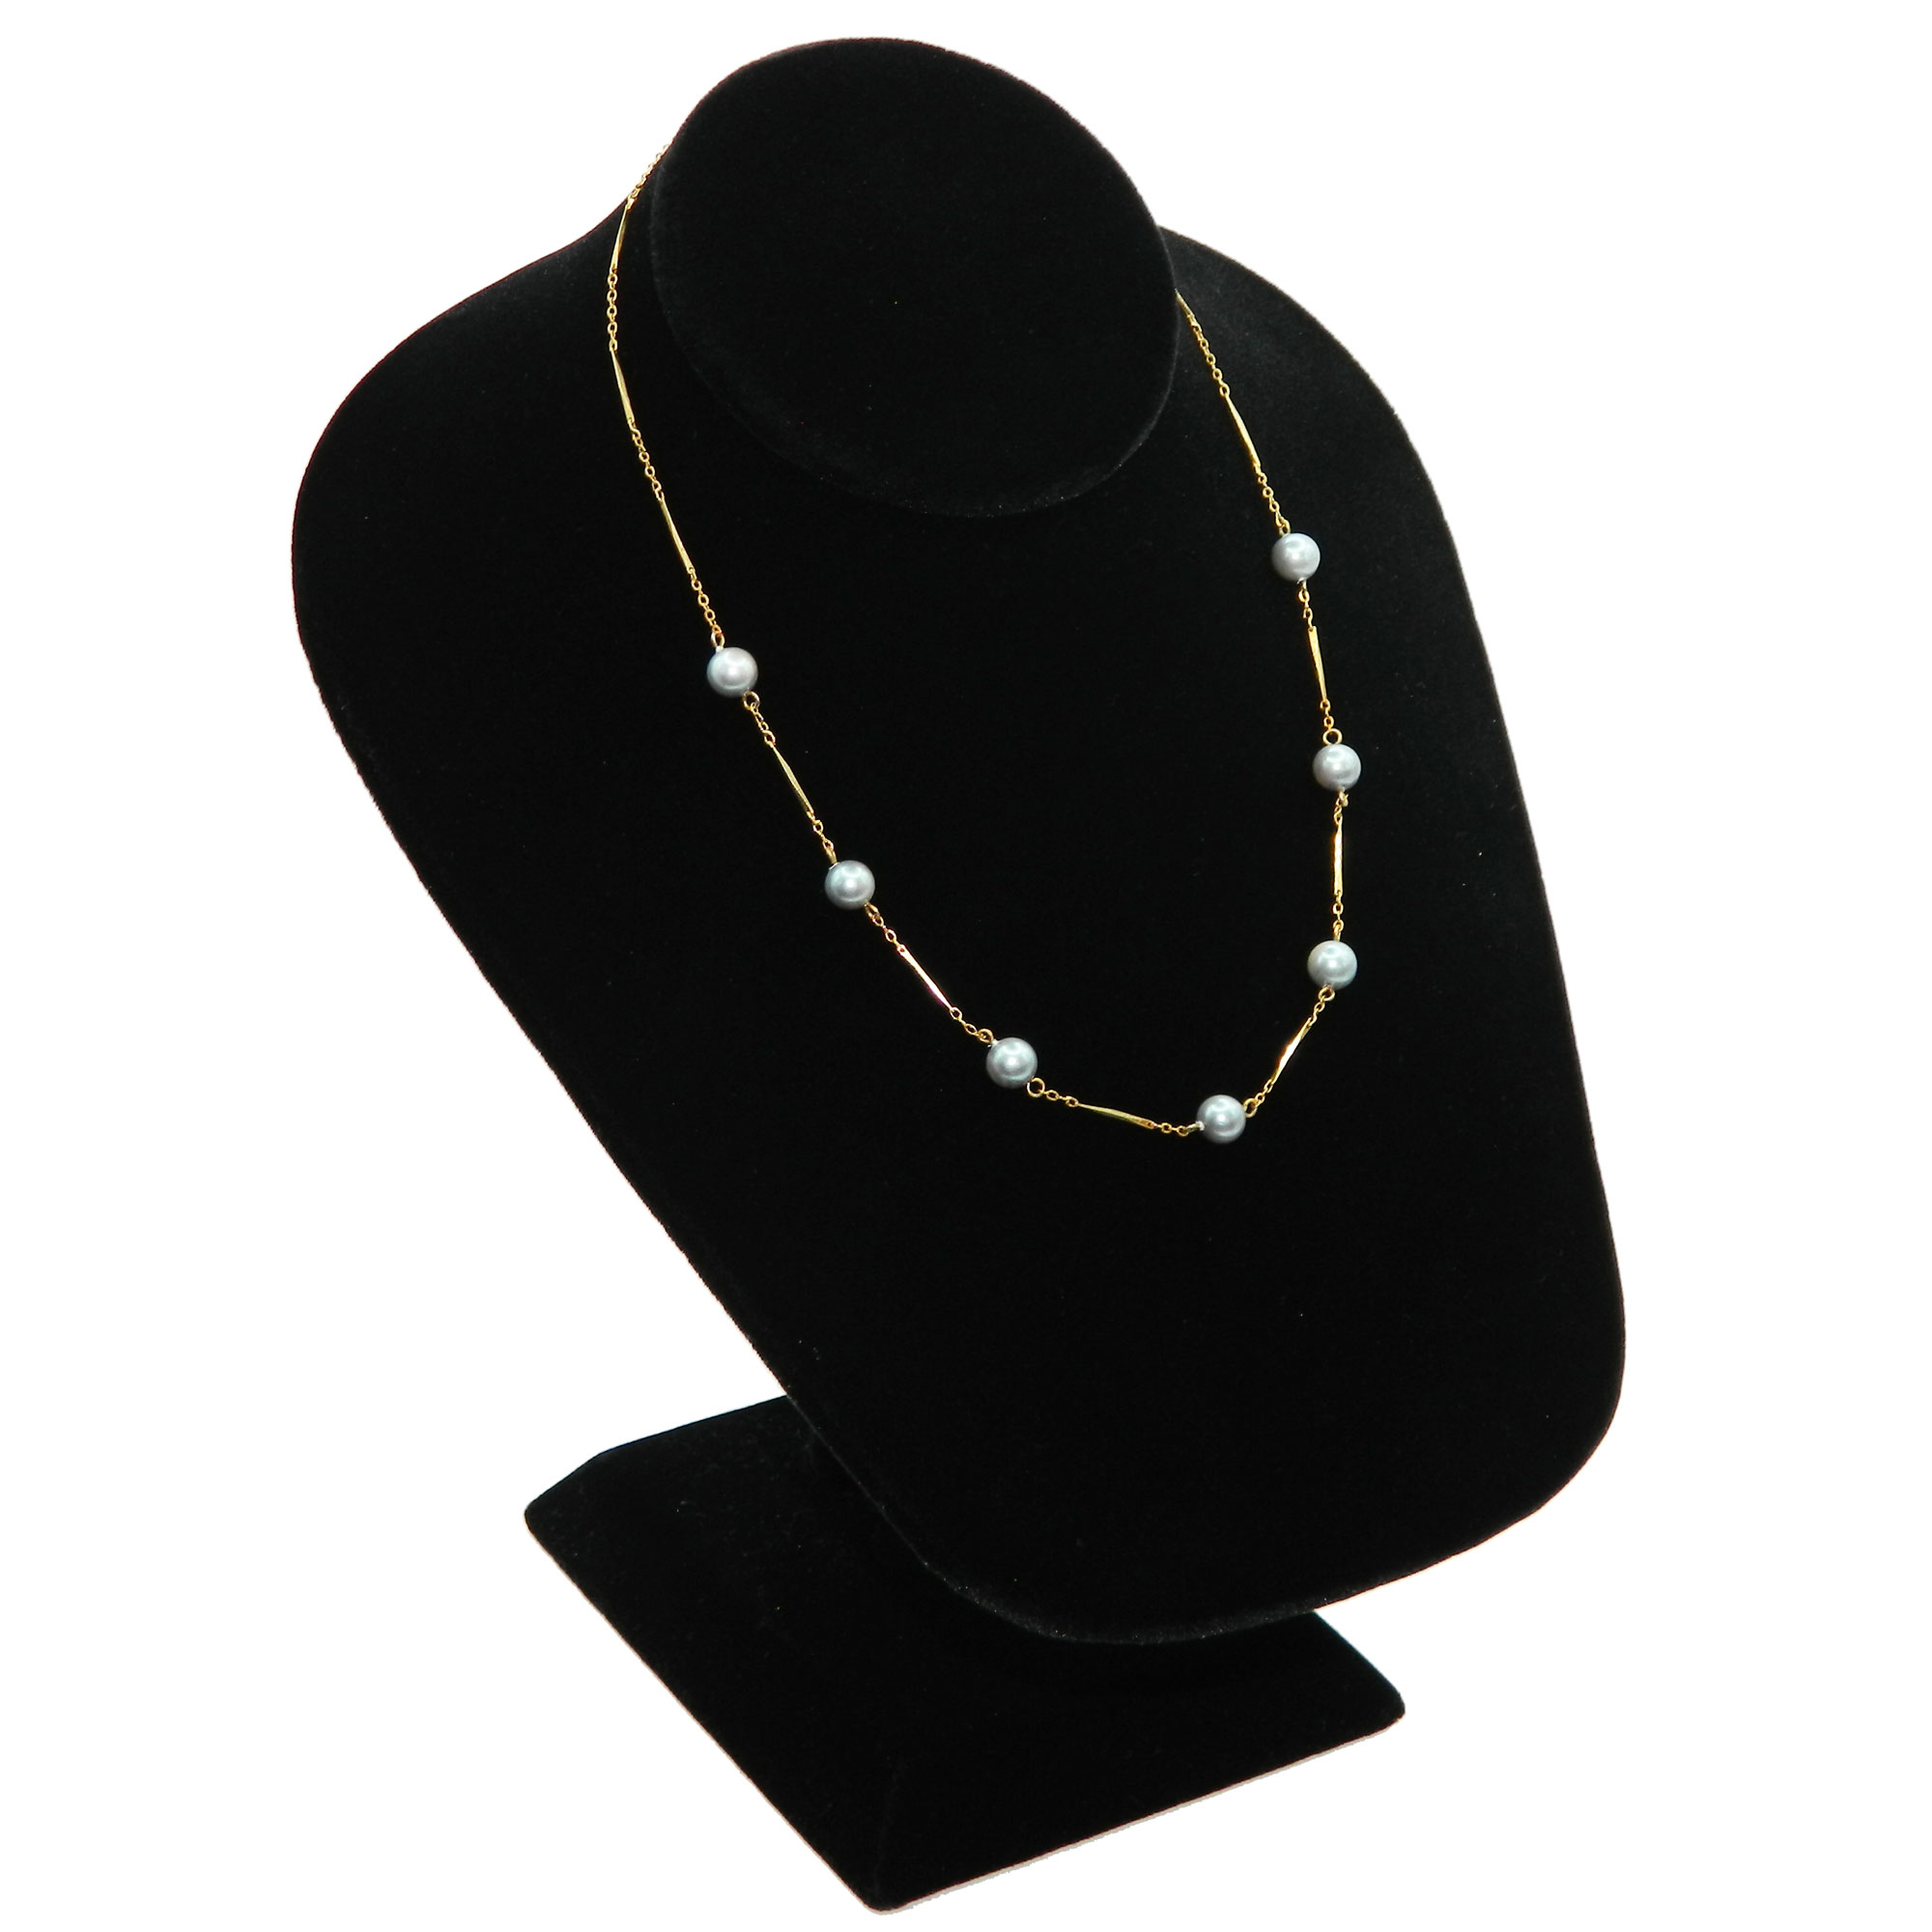 Grey faux pearl necklace